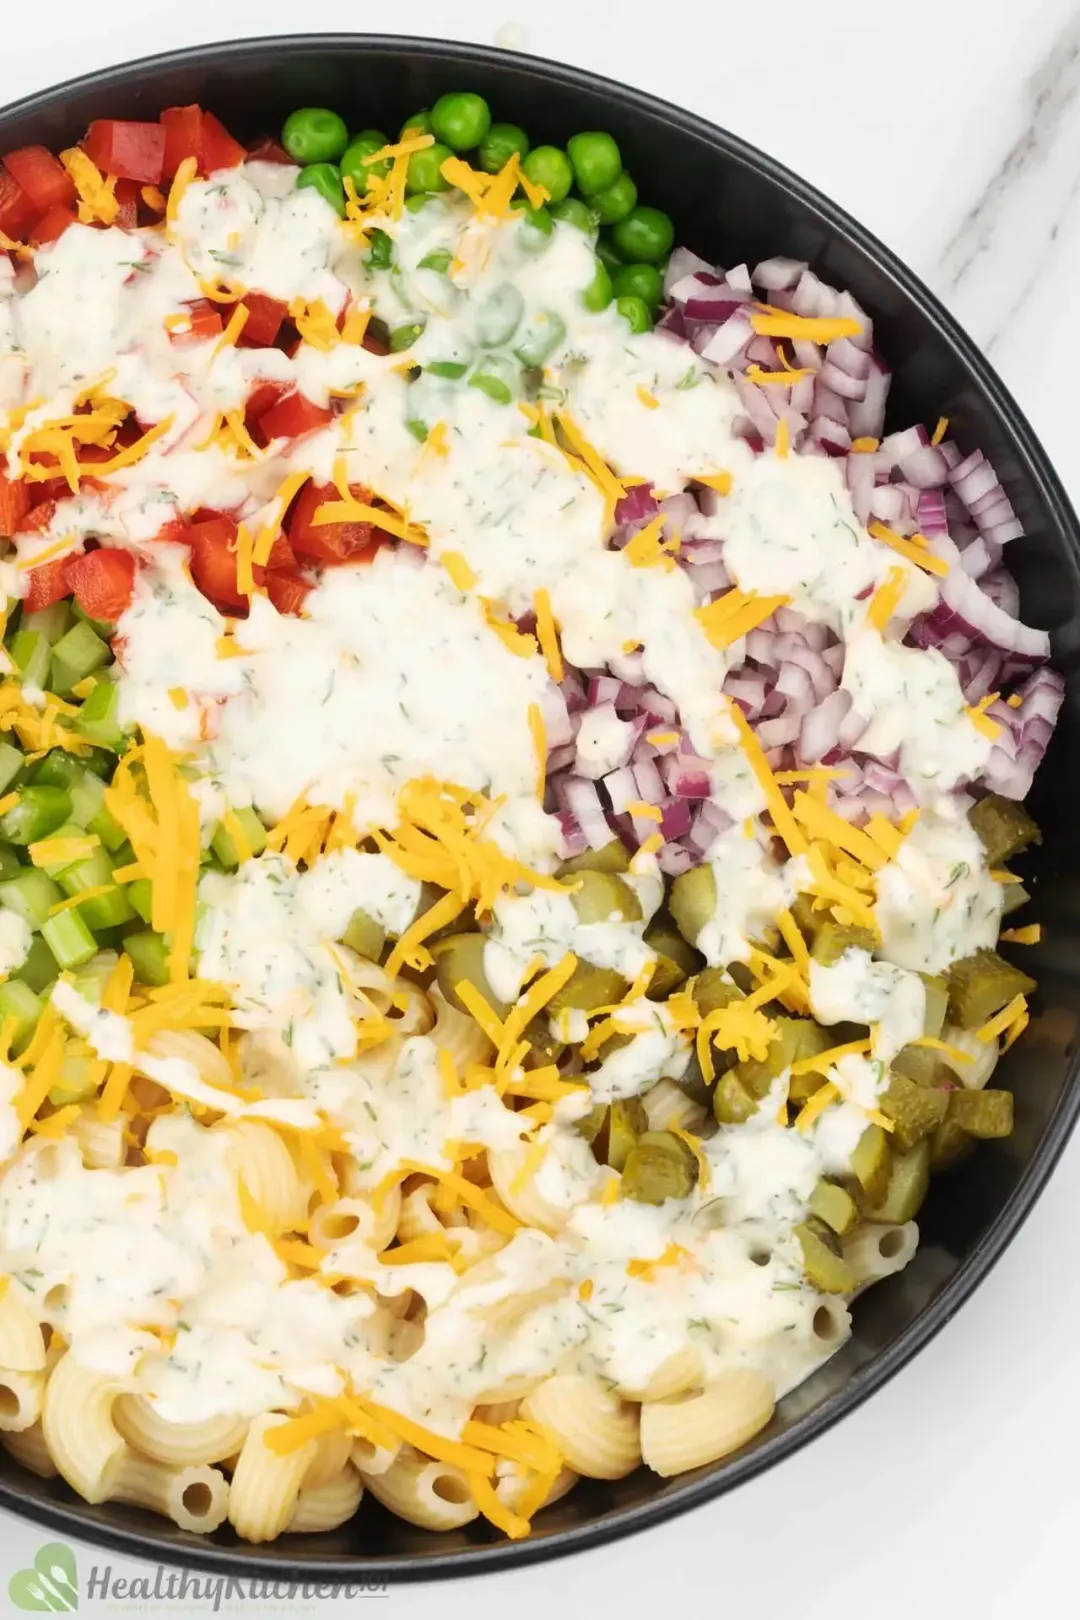 A bowl of macaroni salad with diced vegetables and white dressing in the middle.